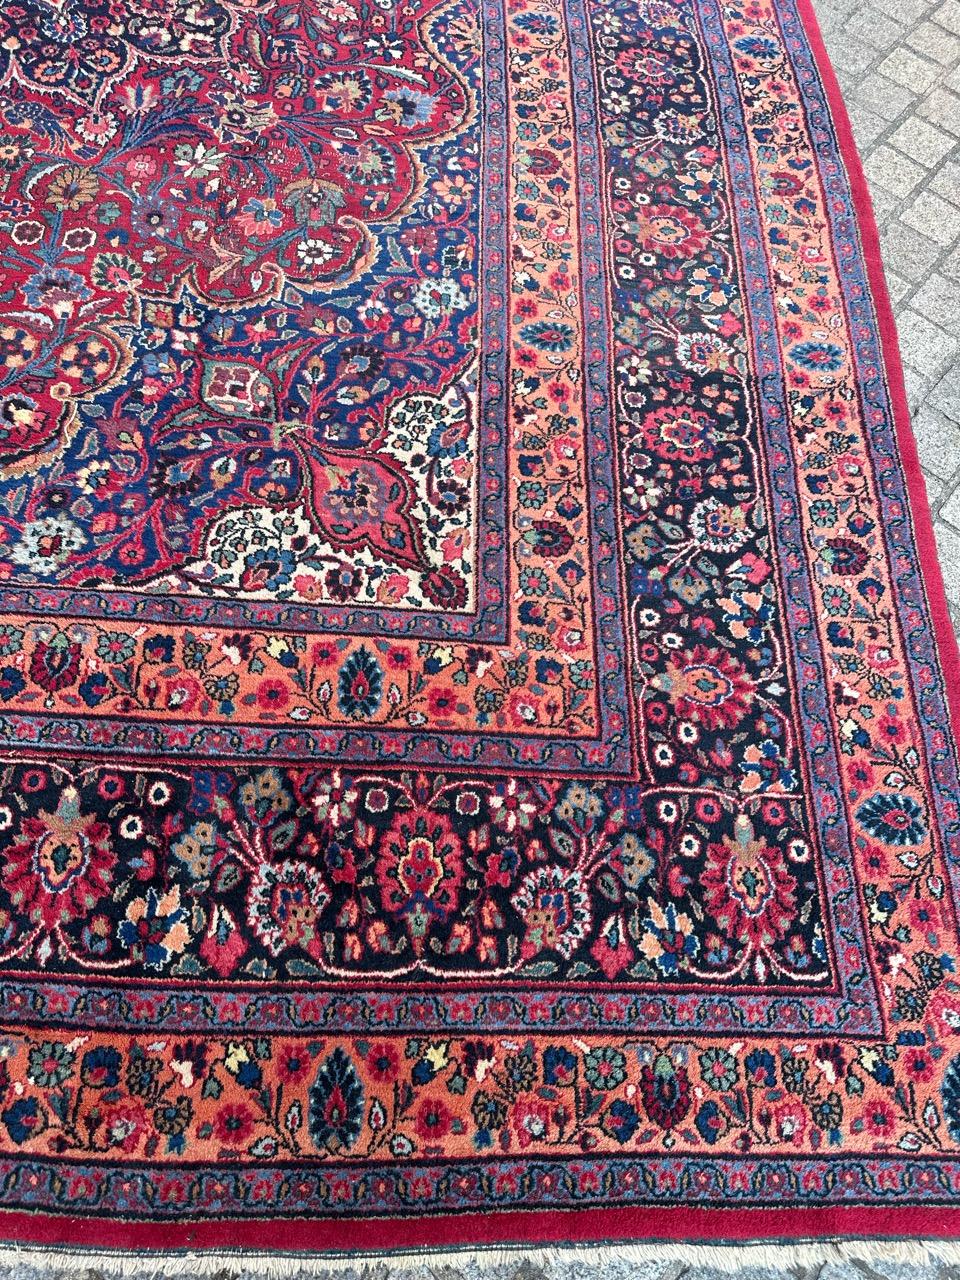 A stunning early 20th-century Dorokhsh rug, boasting a large size and exquisite features. This masterpiece showcases a captivating floral design with a rich array of natural colors. Meticulously hand-knotted using wool velvet on a cotton foundation,